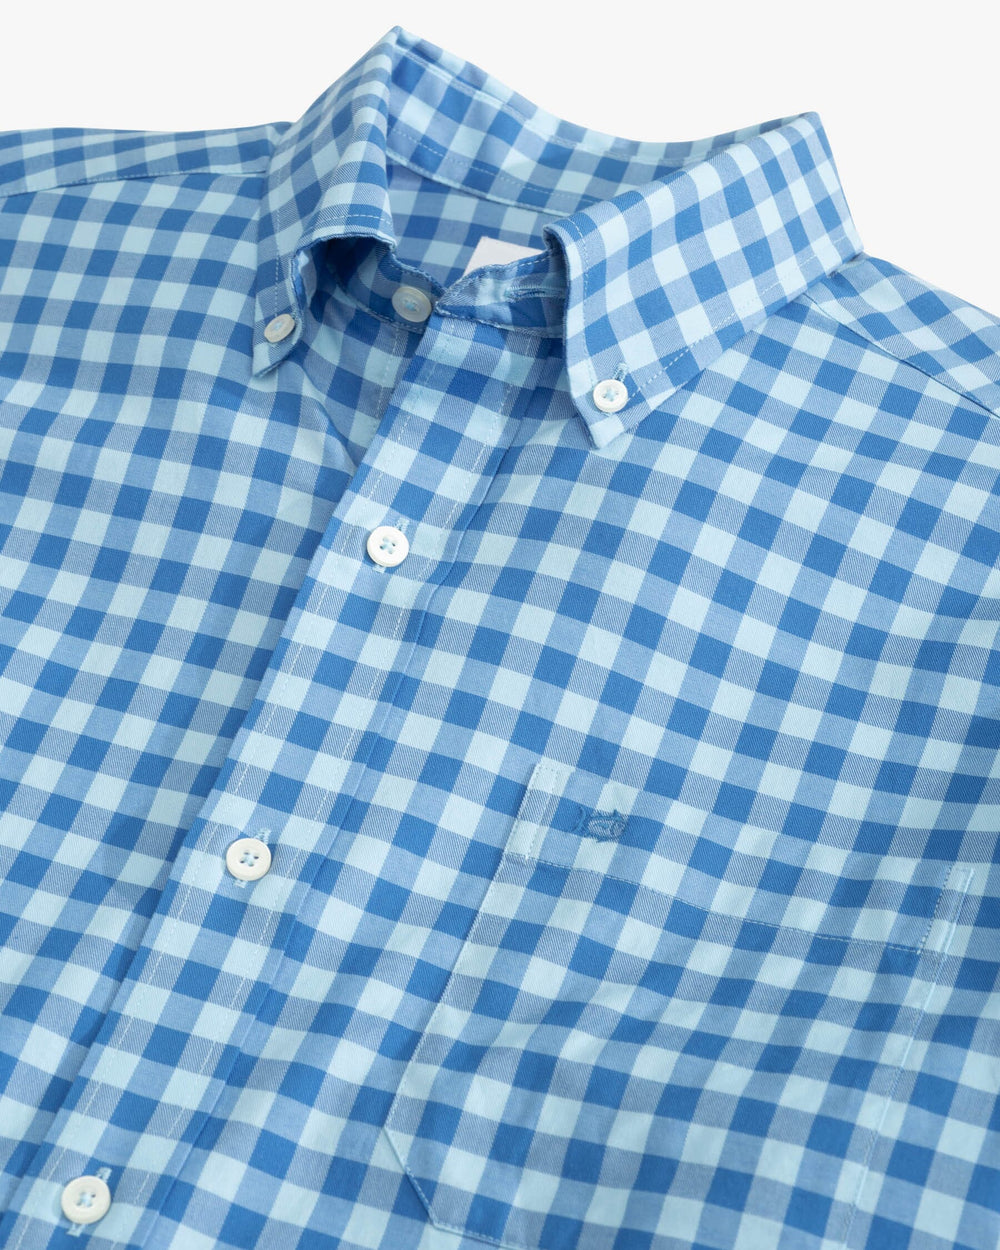 The detail view of the Southern Tide Skipjack Lautner Gingham Intercoastal Sport Shirt by Southern Tide - Rain Water